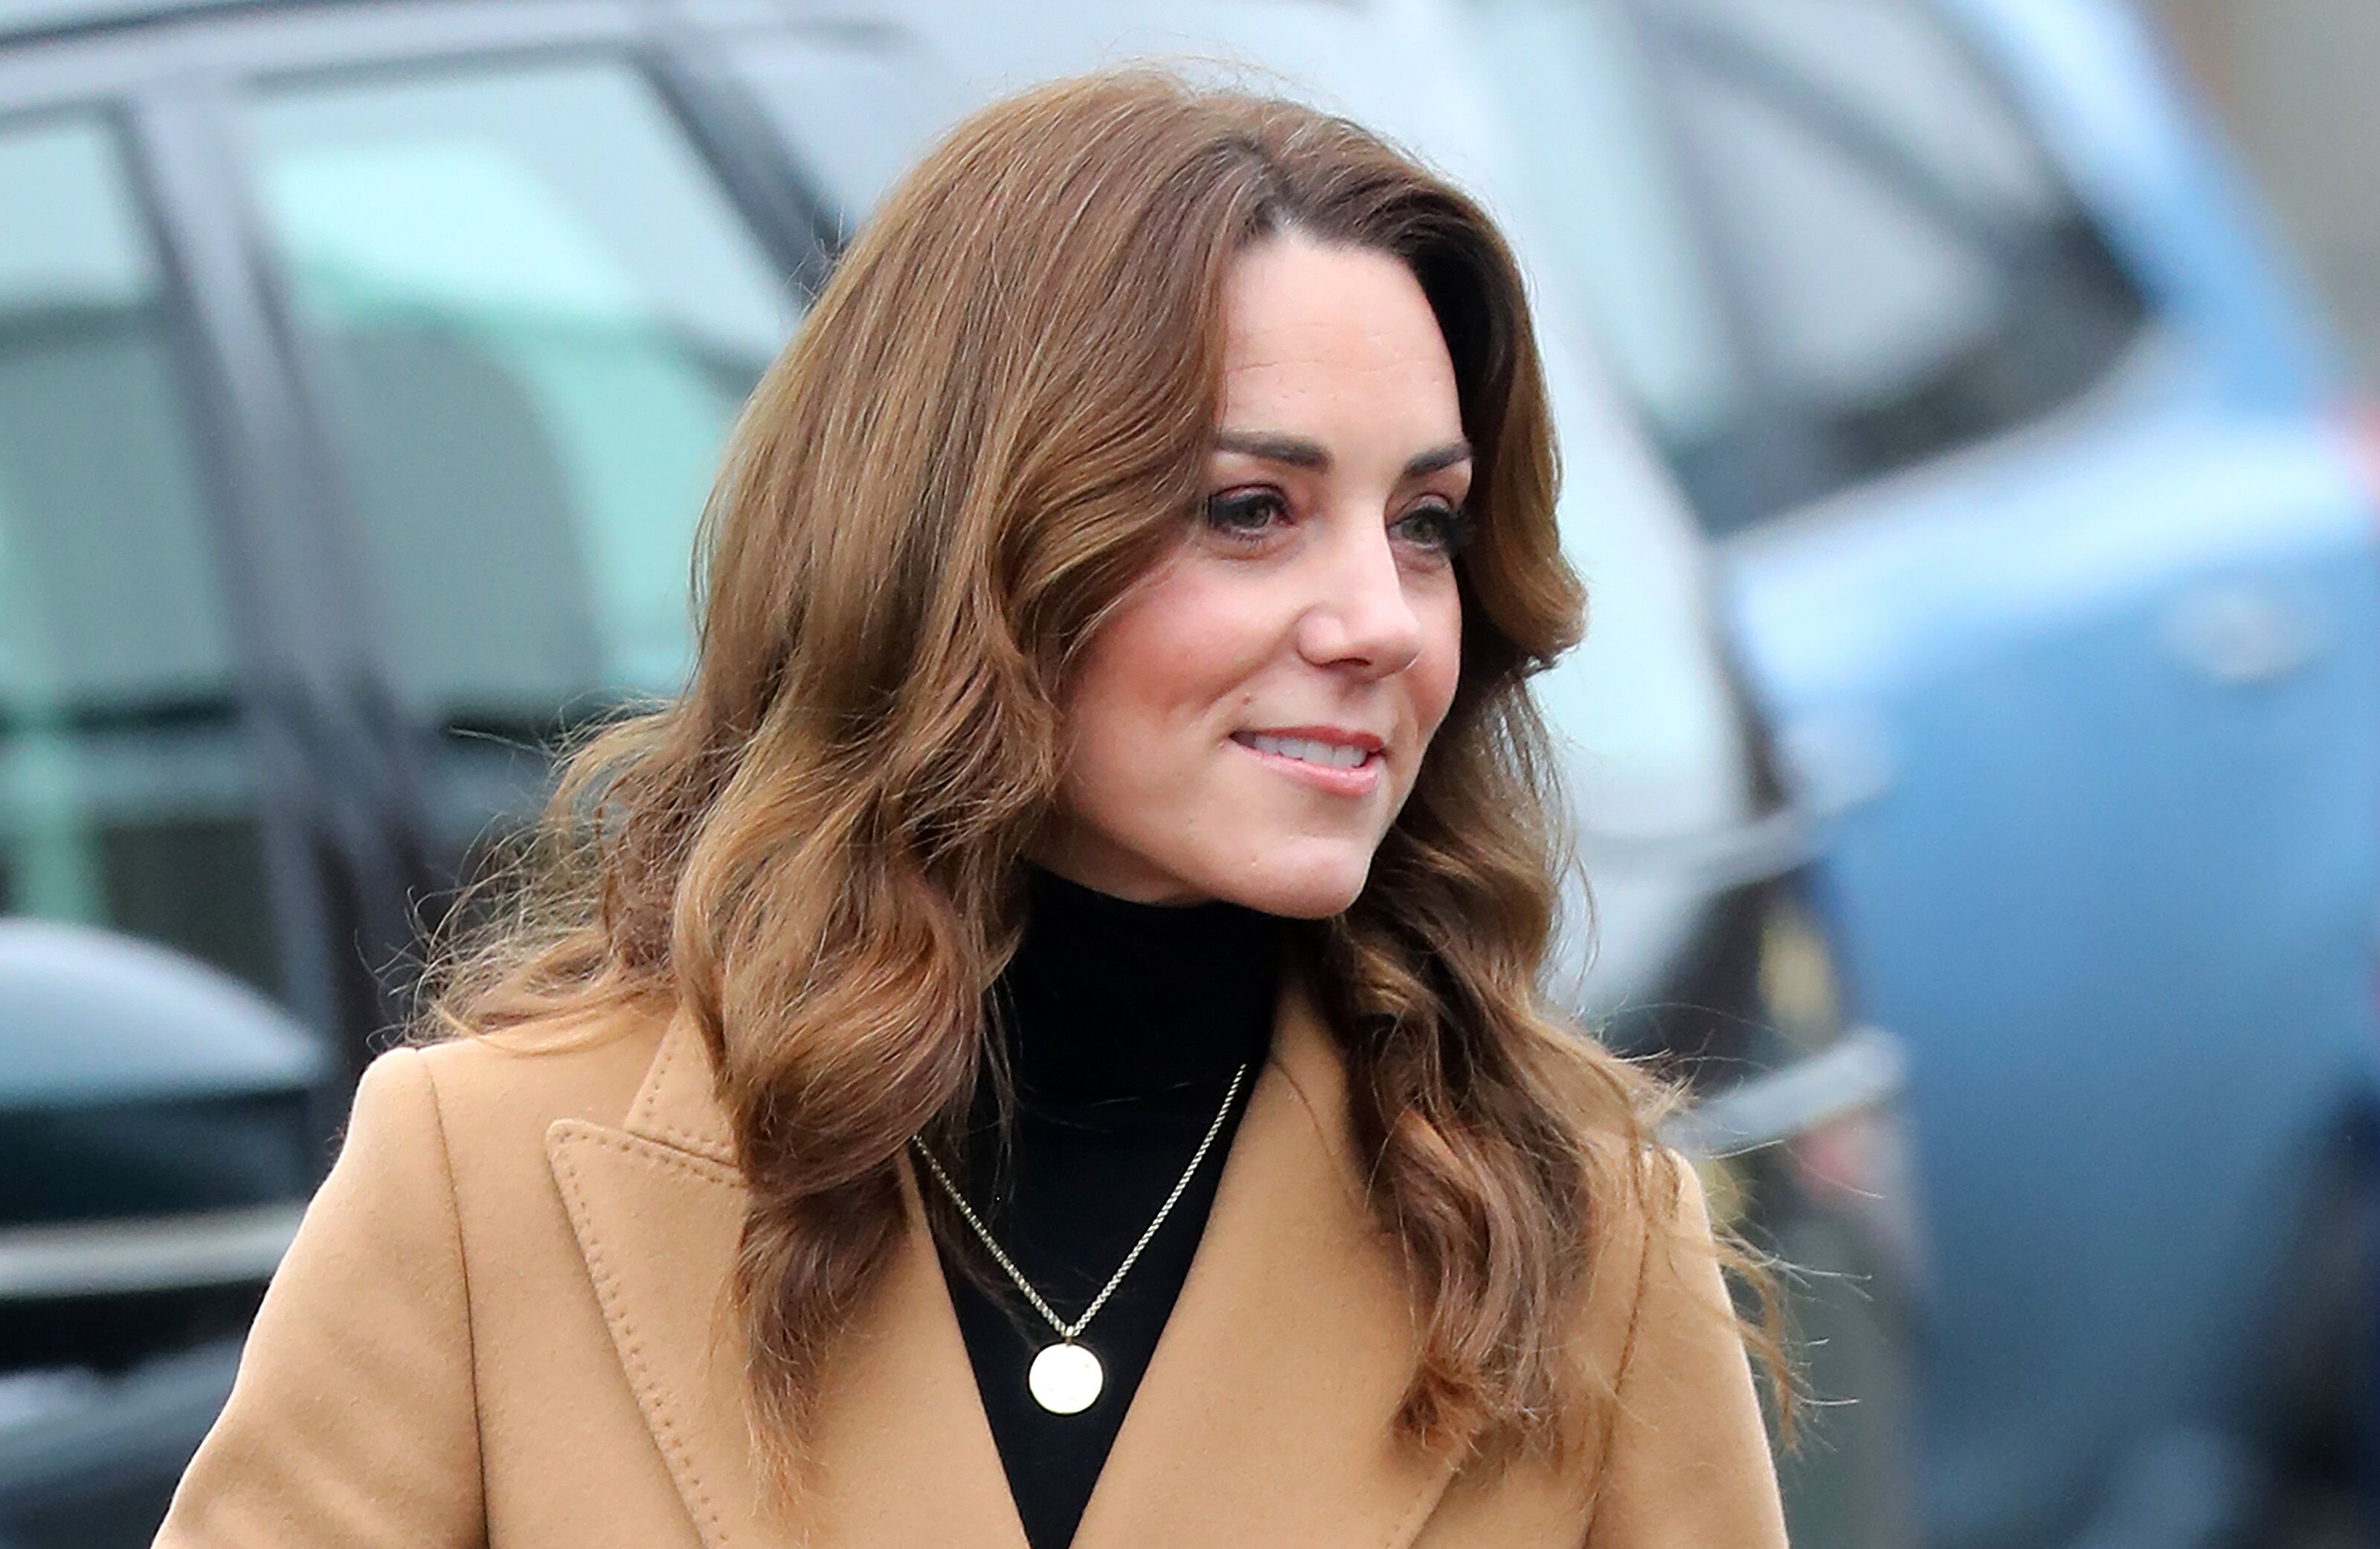 Duchess Kate at Ely and Careau Children’s Centre on January 22, 2020, in Cardiff, Wales | Photo: Chris Jackson/Getty Images